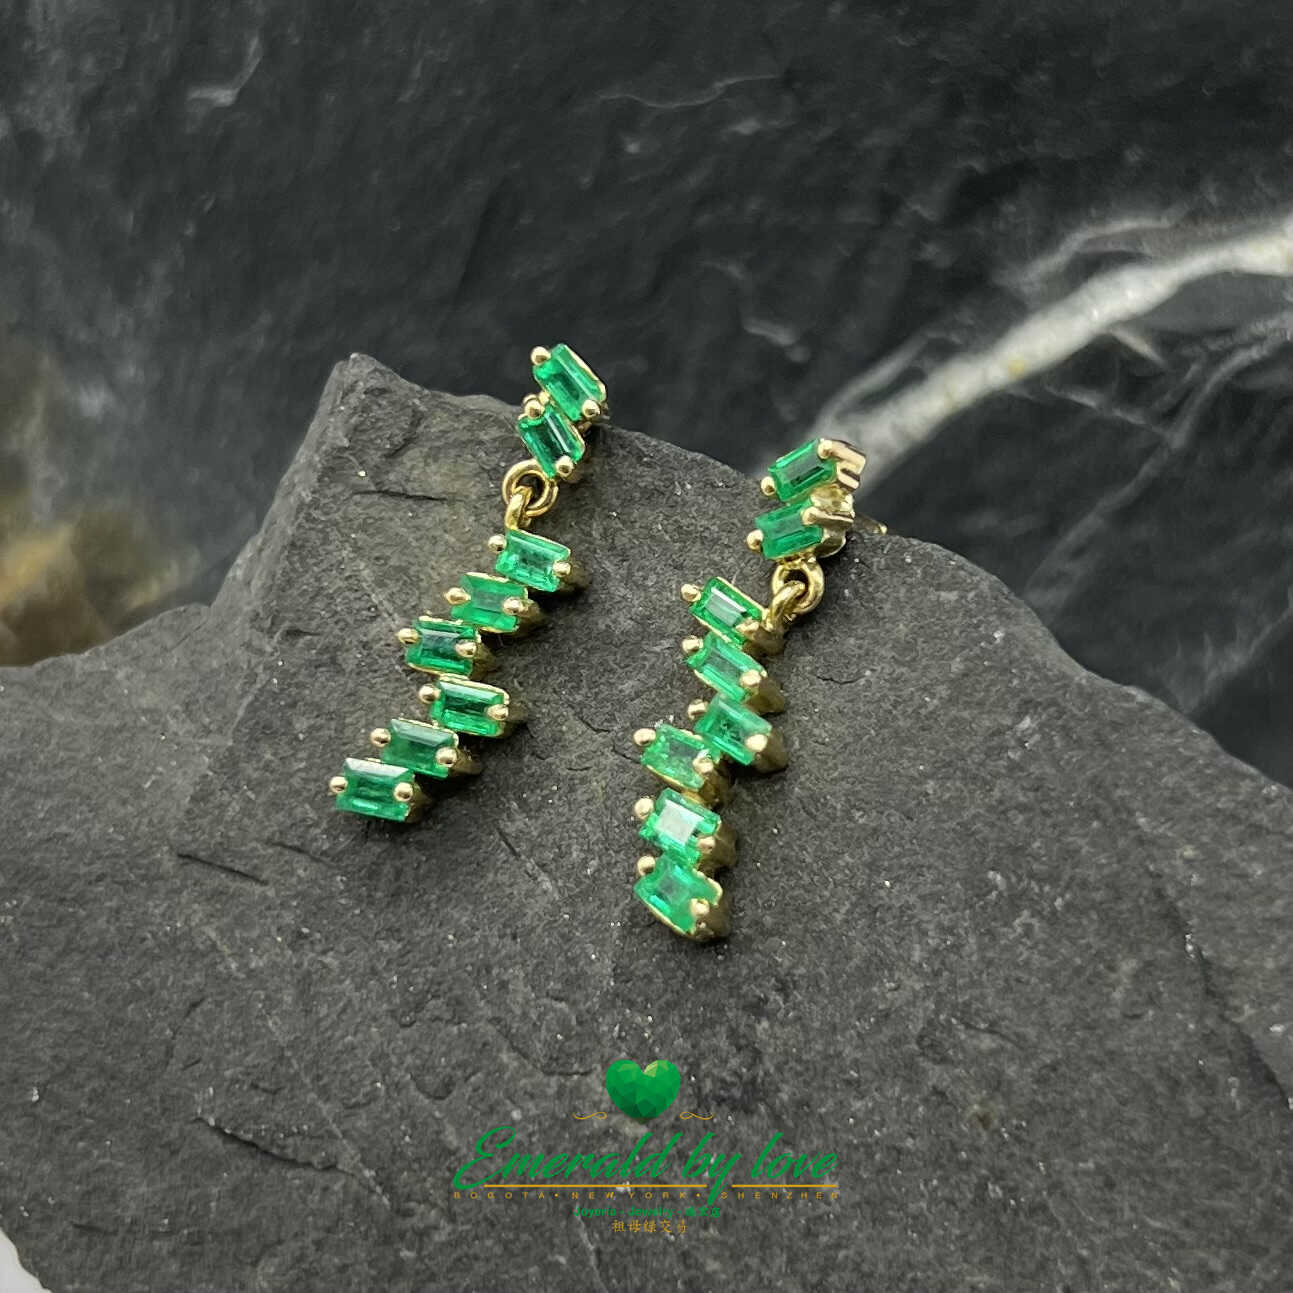 Golden Gleam: 18K Yellow Gold Earrings with Approximate 1.0 TCW Baguette Emeralds